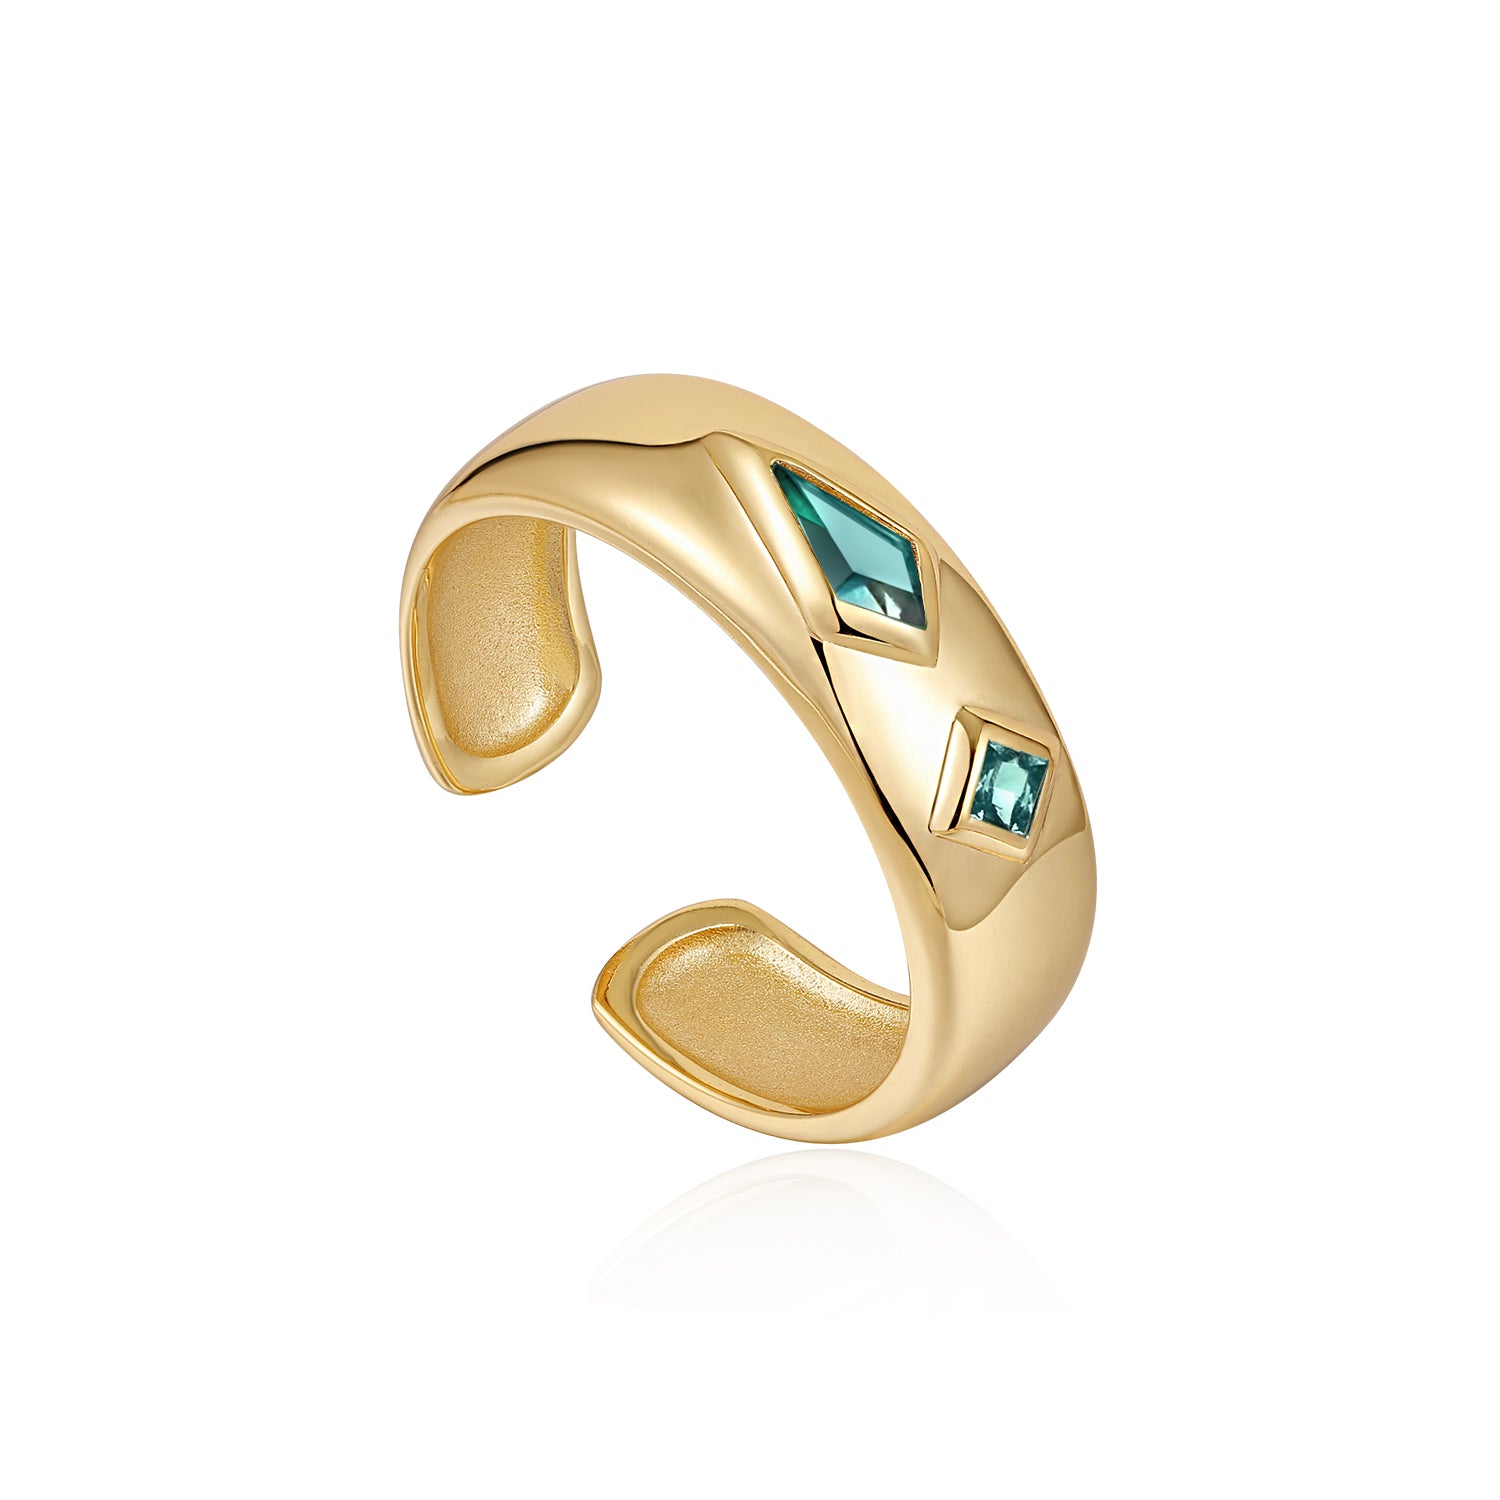 TEAL SPARKLE EMBLEM THICK BAND RING